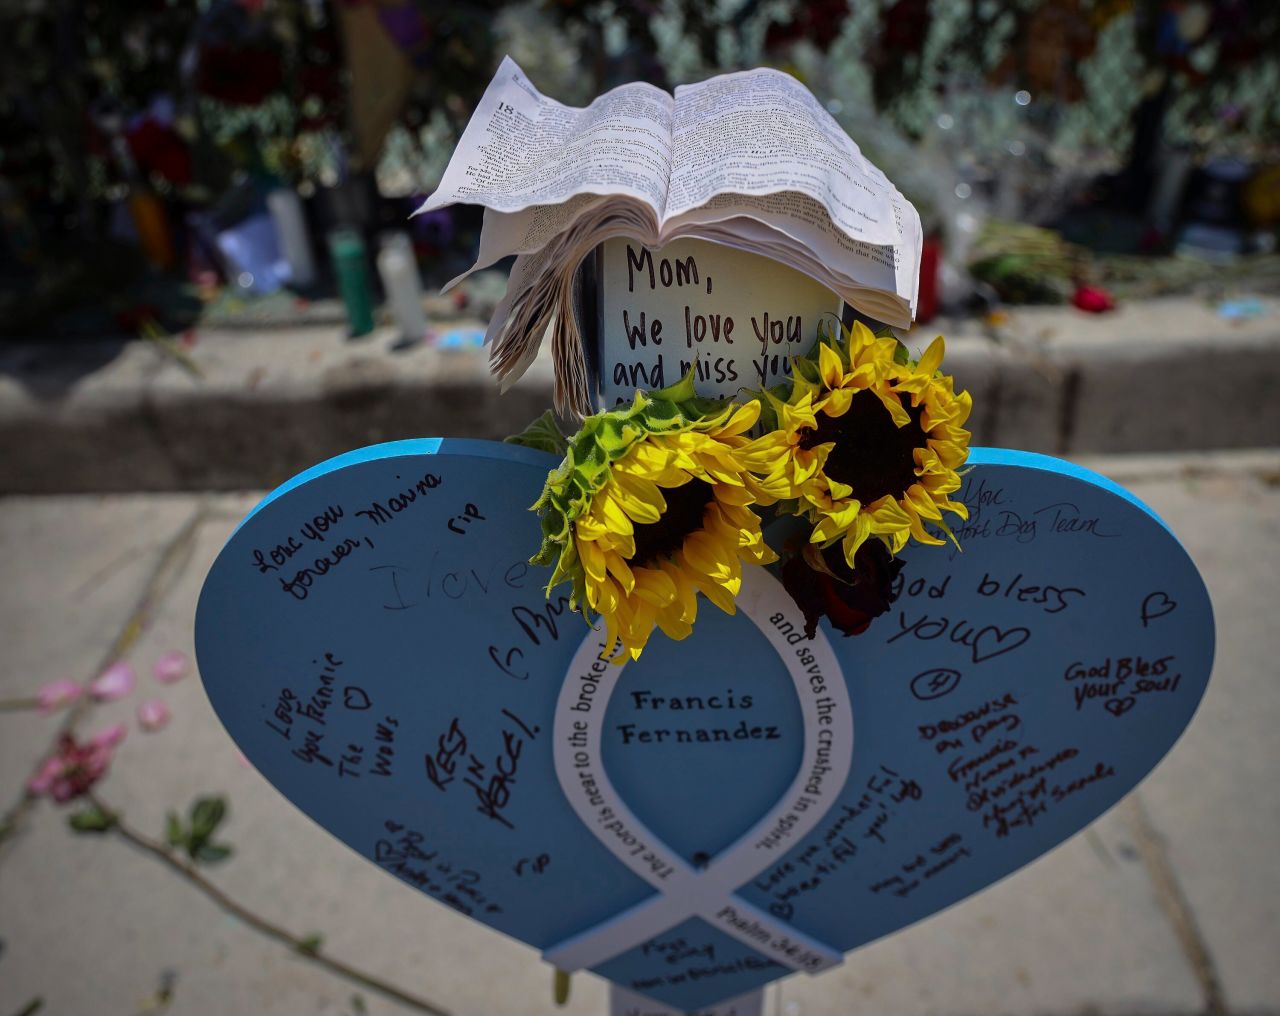 Wooden hearts with victims' names have been put up at the memorial site near the building's remains.